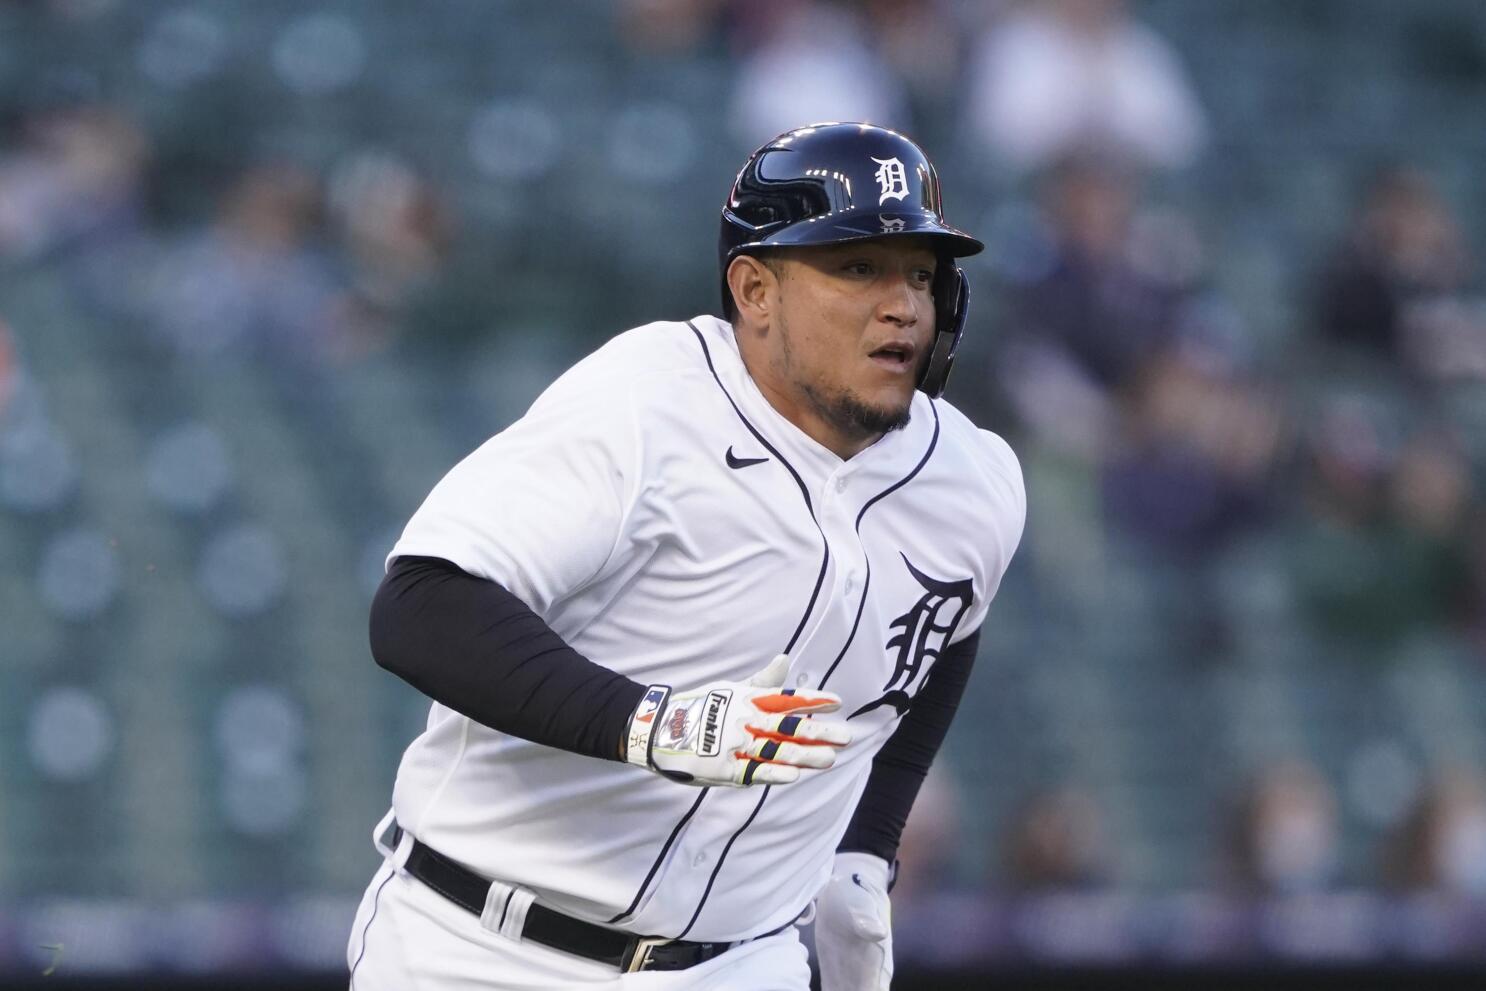 Tigers lineup update: Miguel Cabrera to rest in Game 1 of